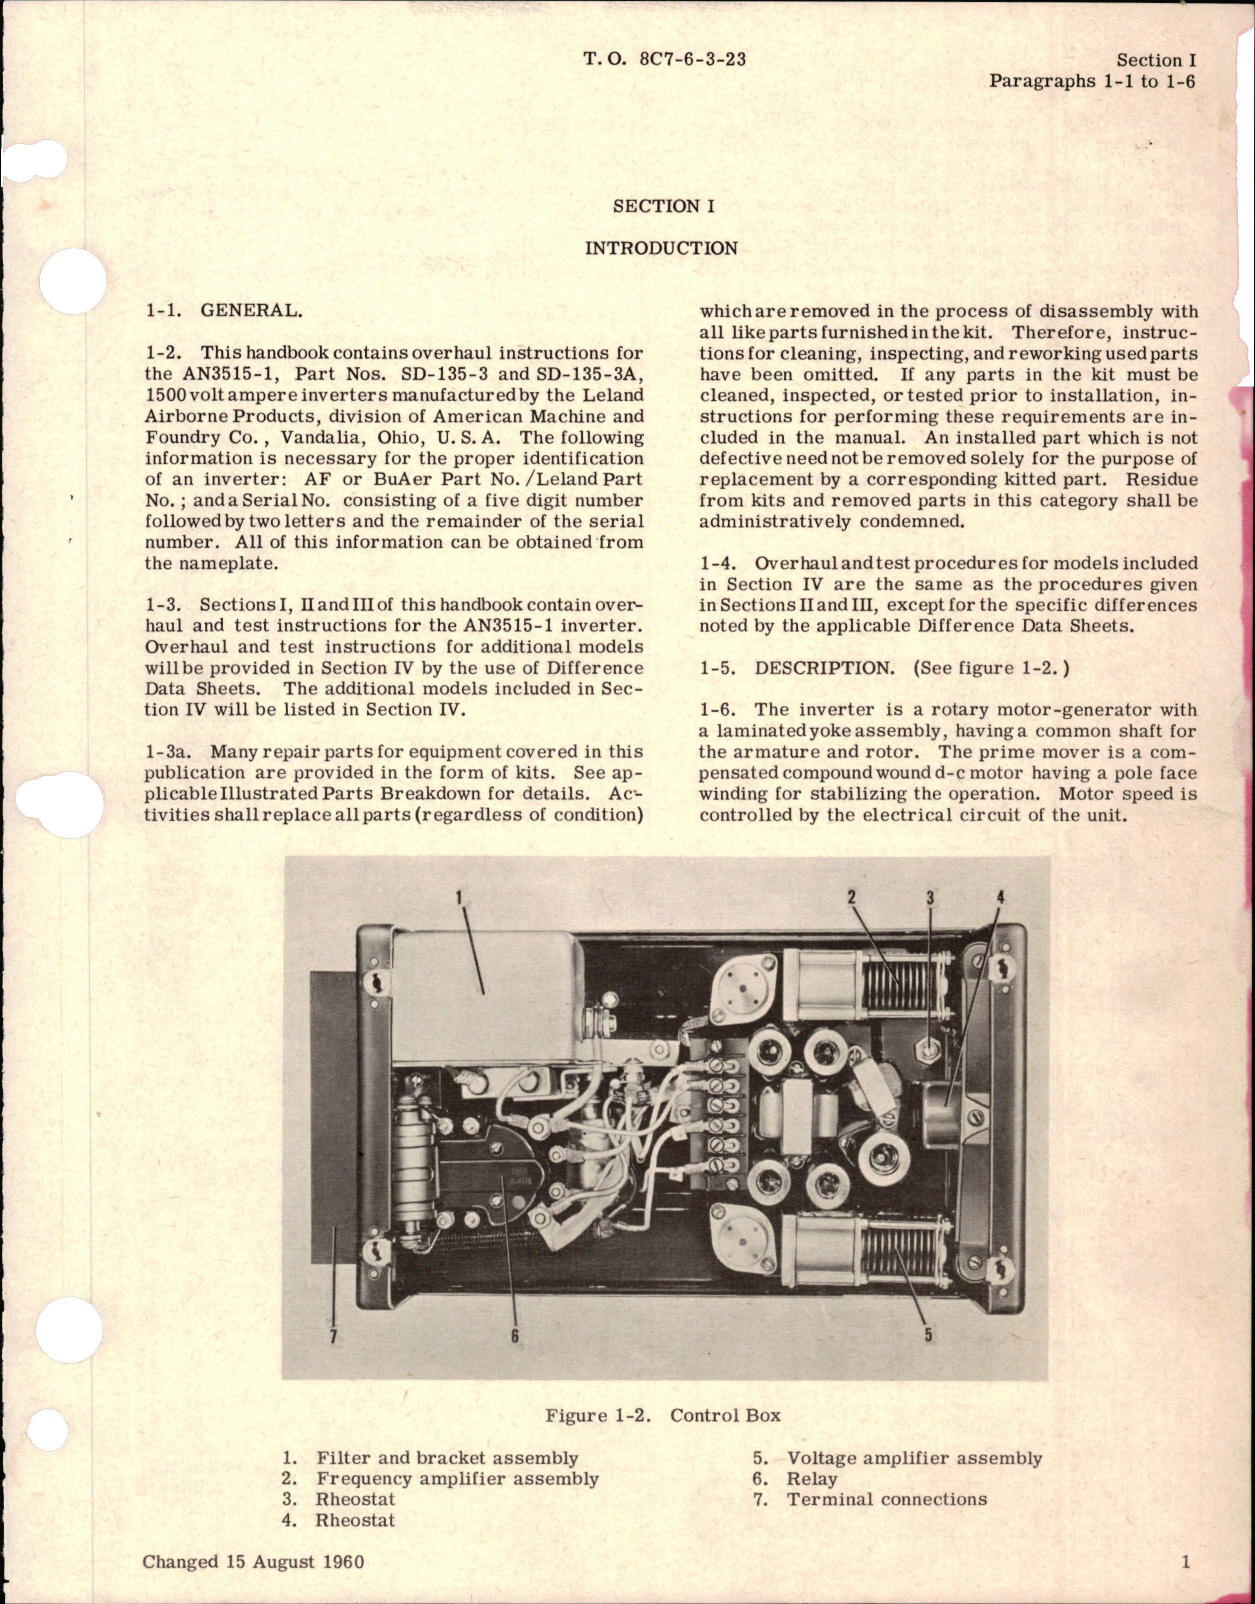 Sample page 5 from AirCorps Library document: Overhaul for Inverter - AN 3515-1 - Part SD-135-3 and SD-135-3A